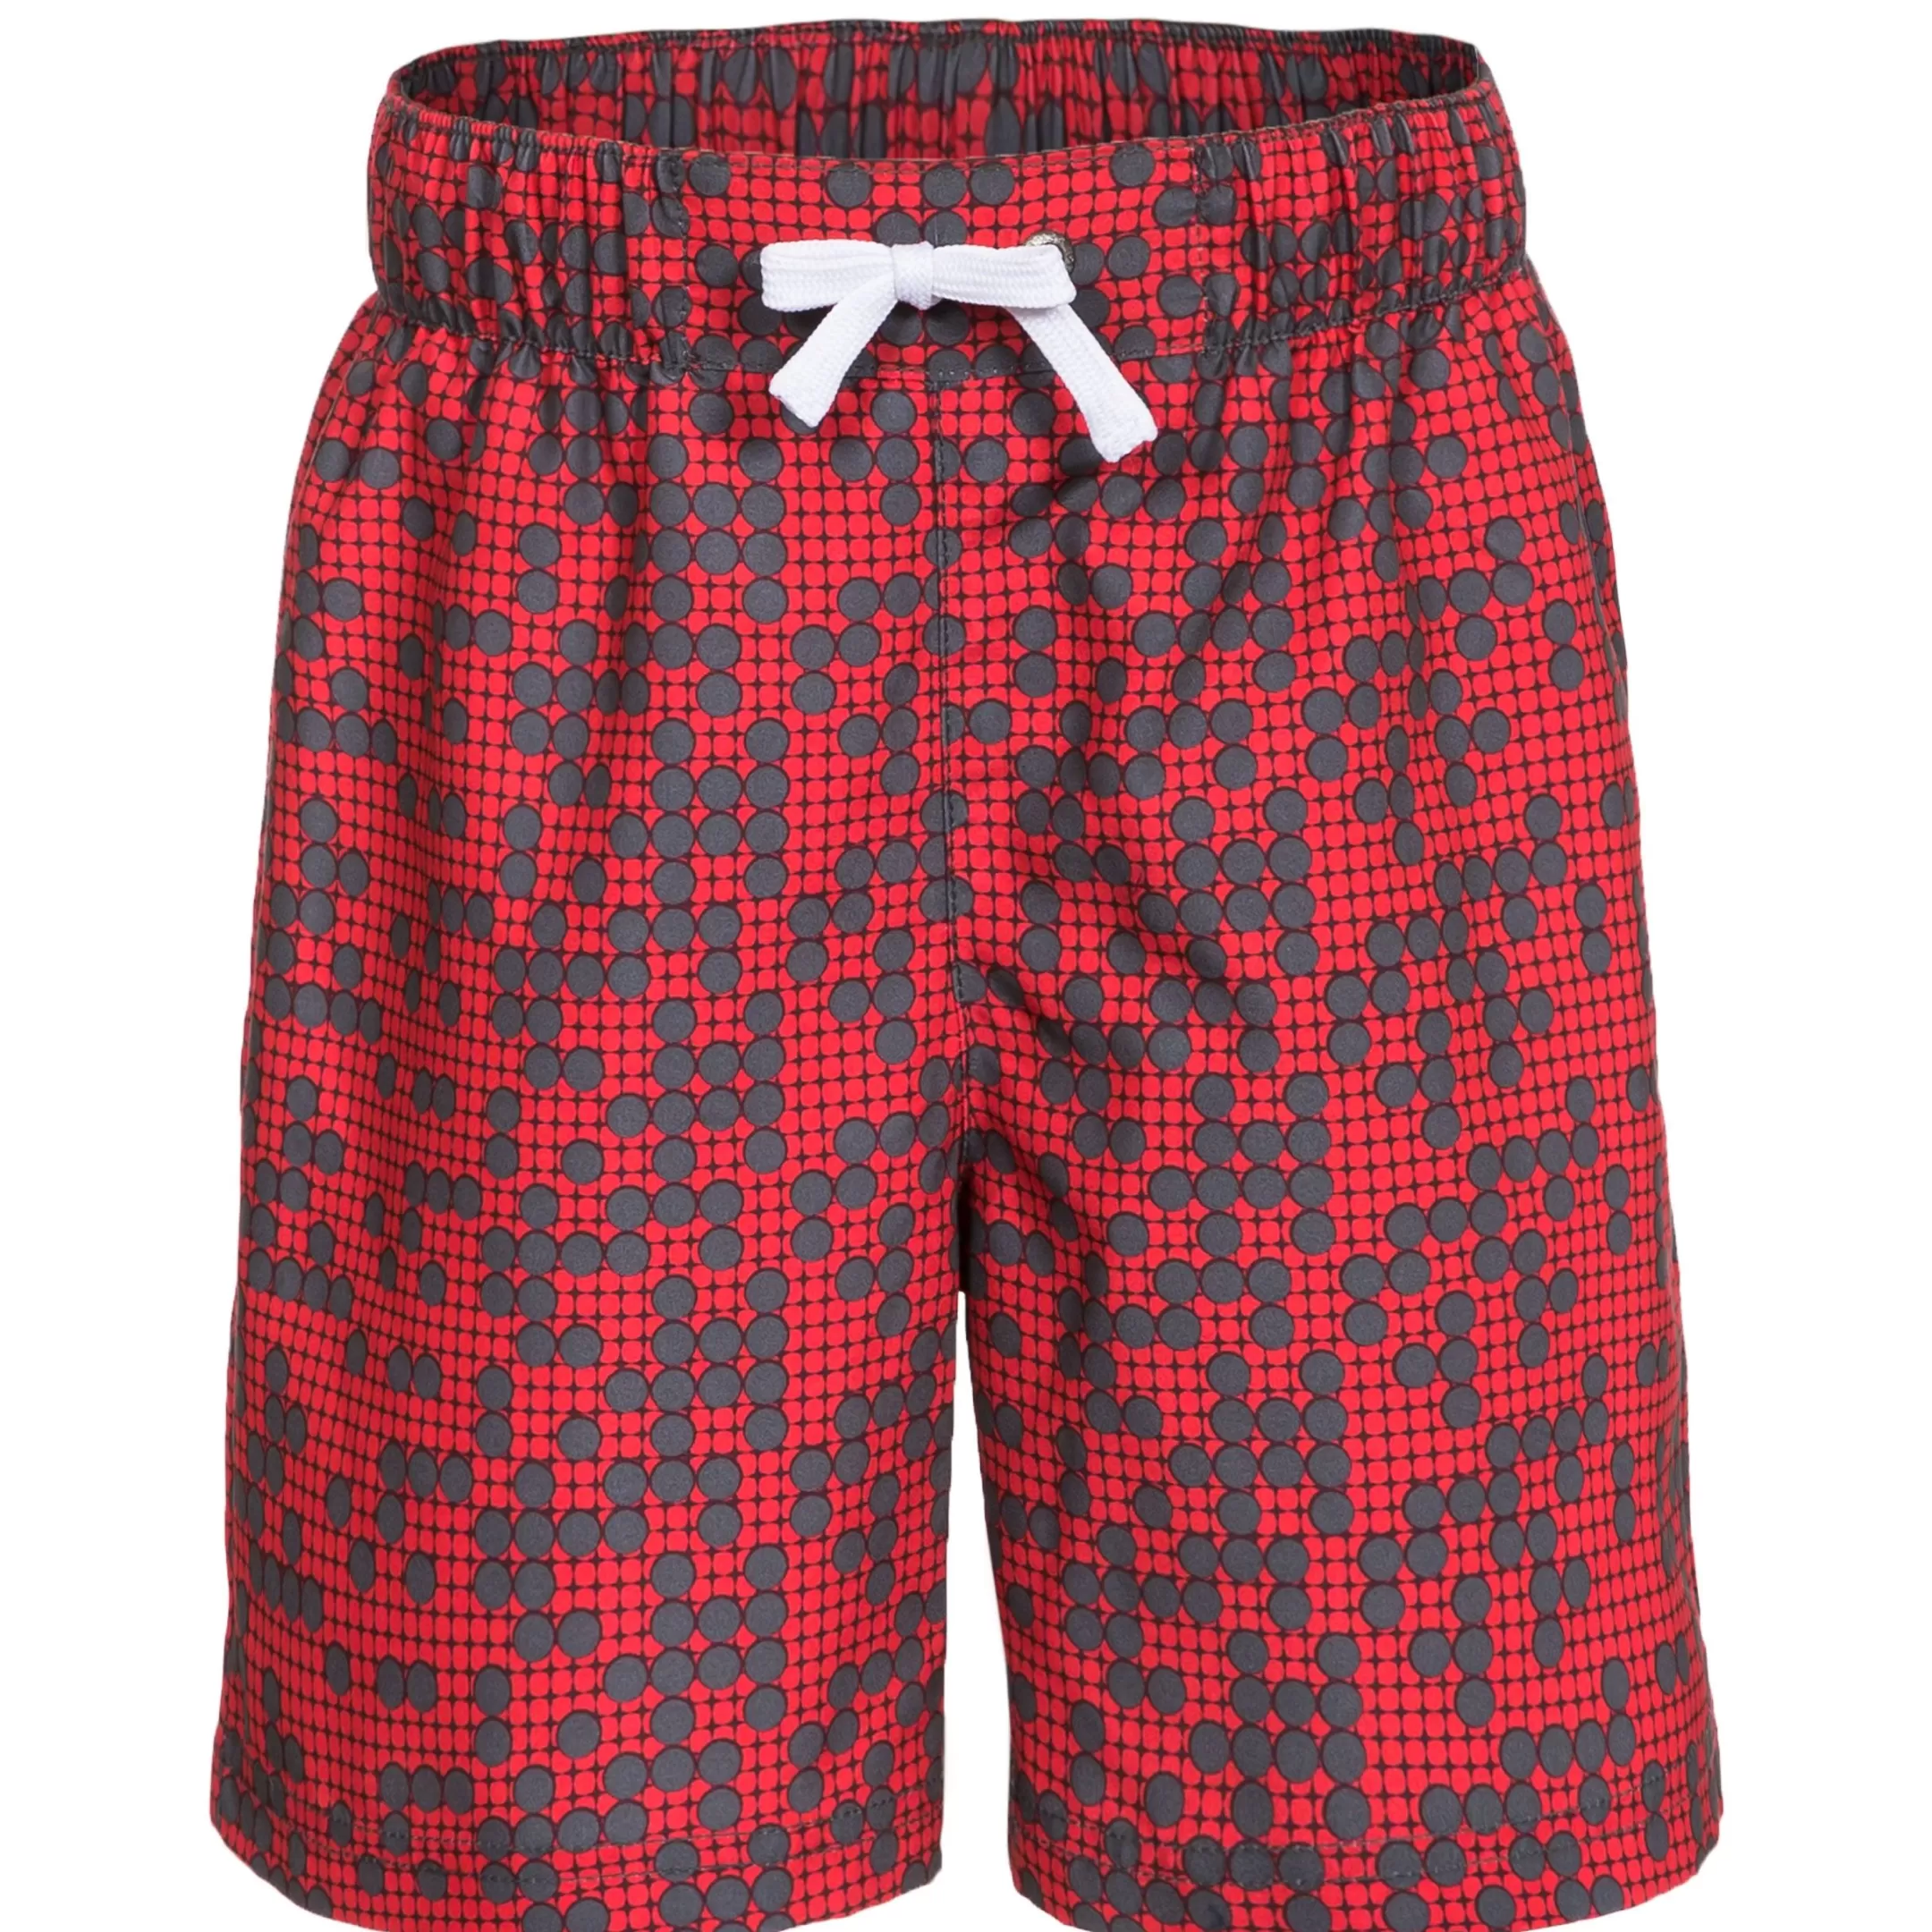 Alley Kids' Printed Summer Shorts | Trespass Clearance